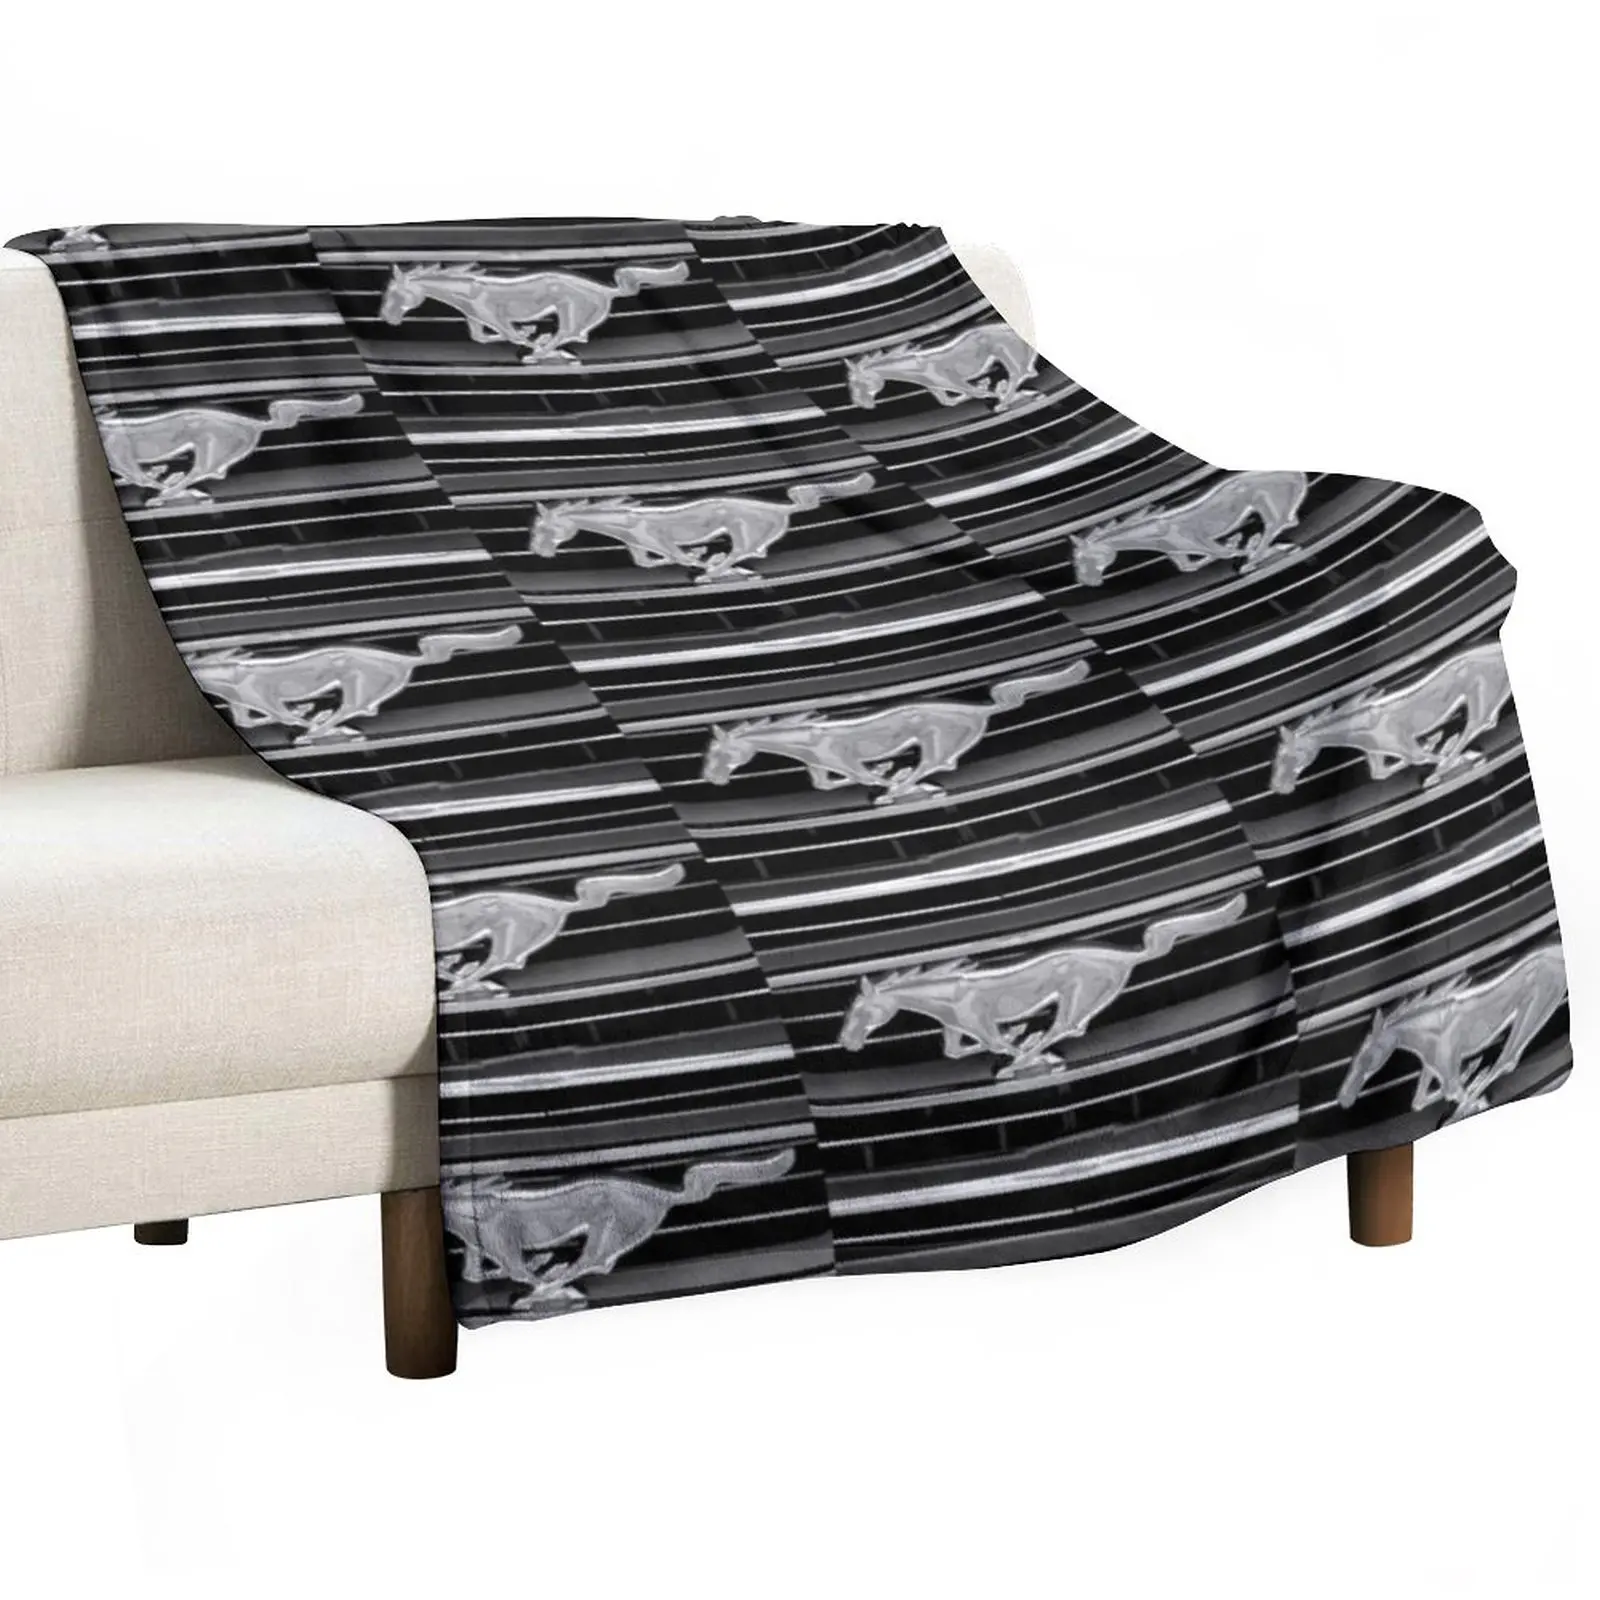 

Ford Mustang Emblem 1968 Throw Blanket Soft Plaid Blanket For Baby Decorative Sofa Blanket